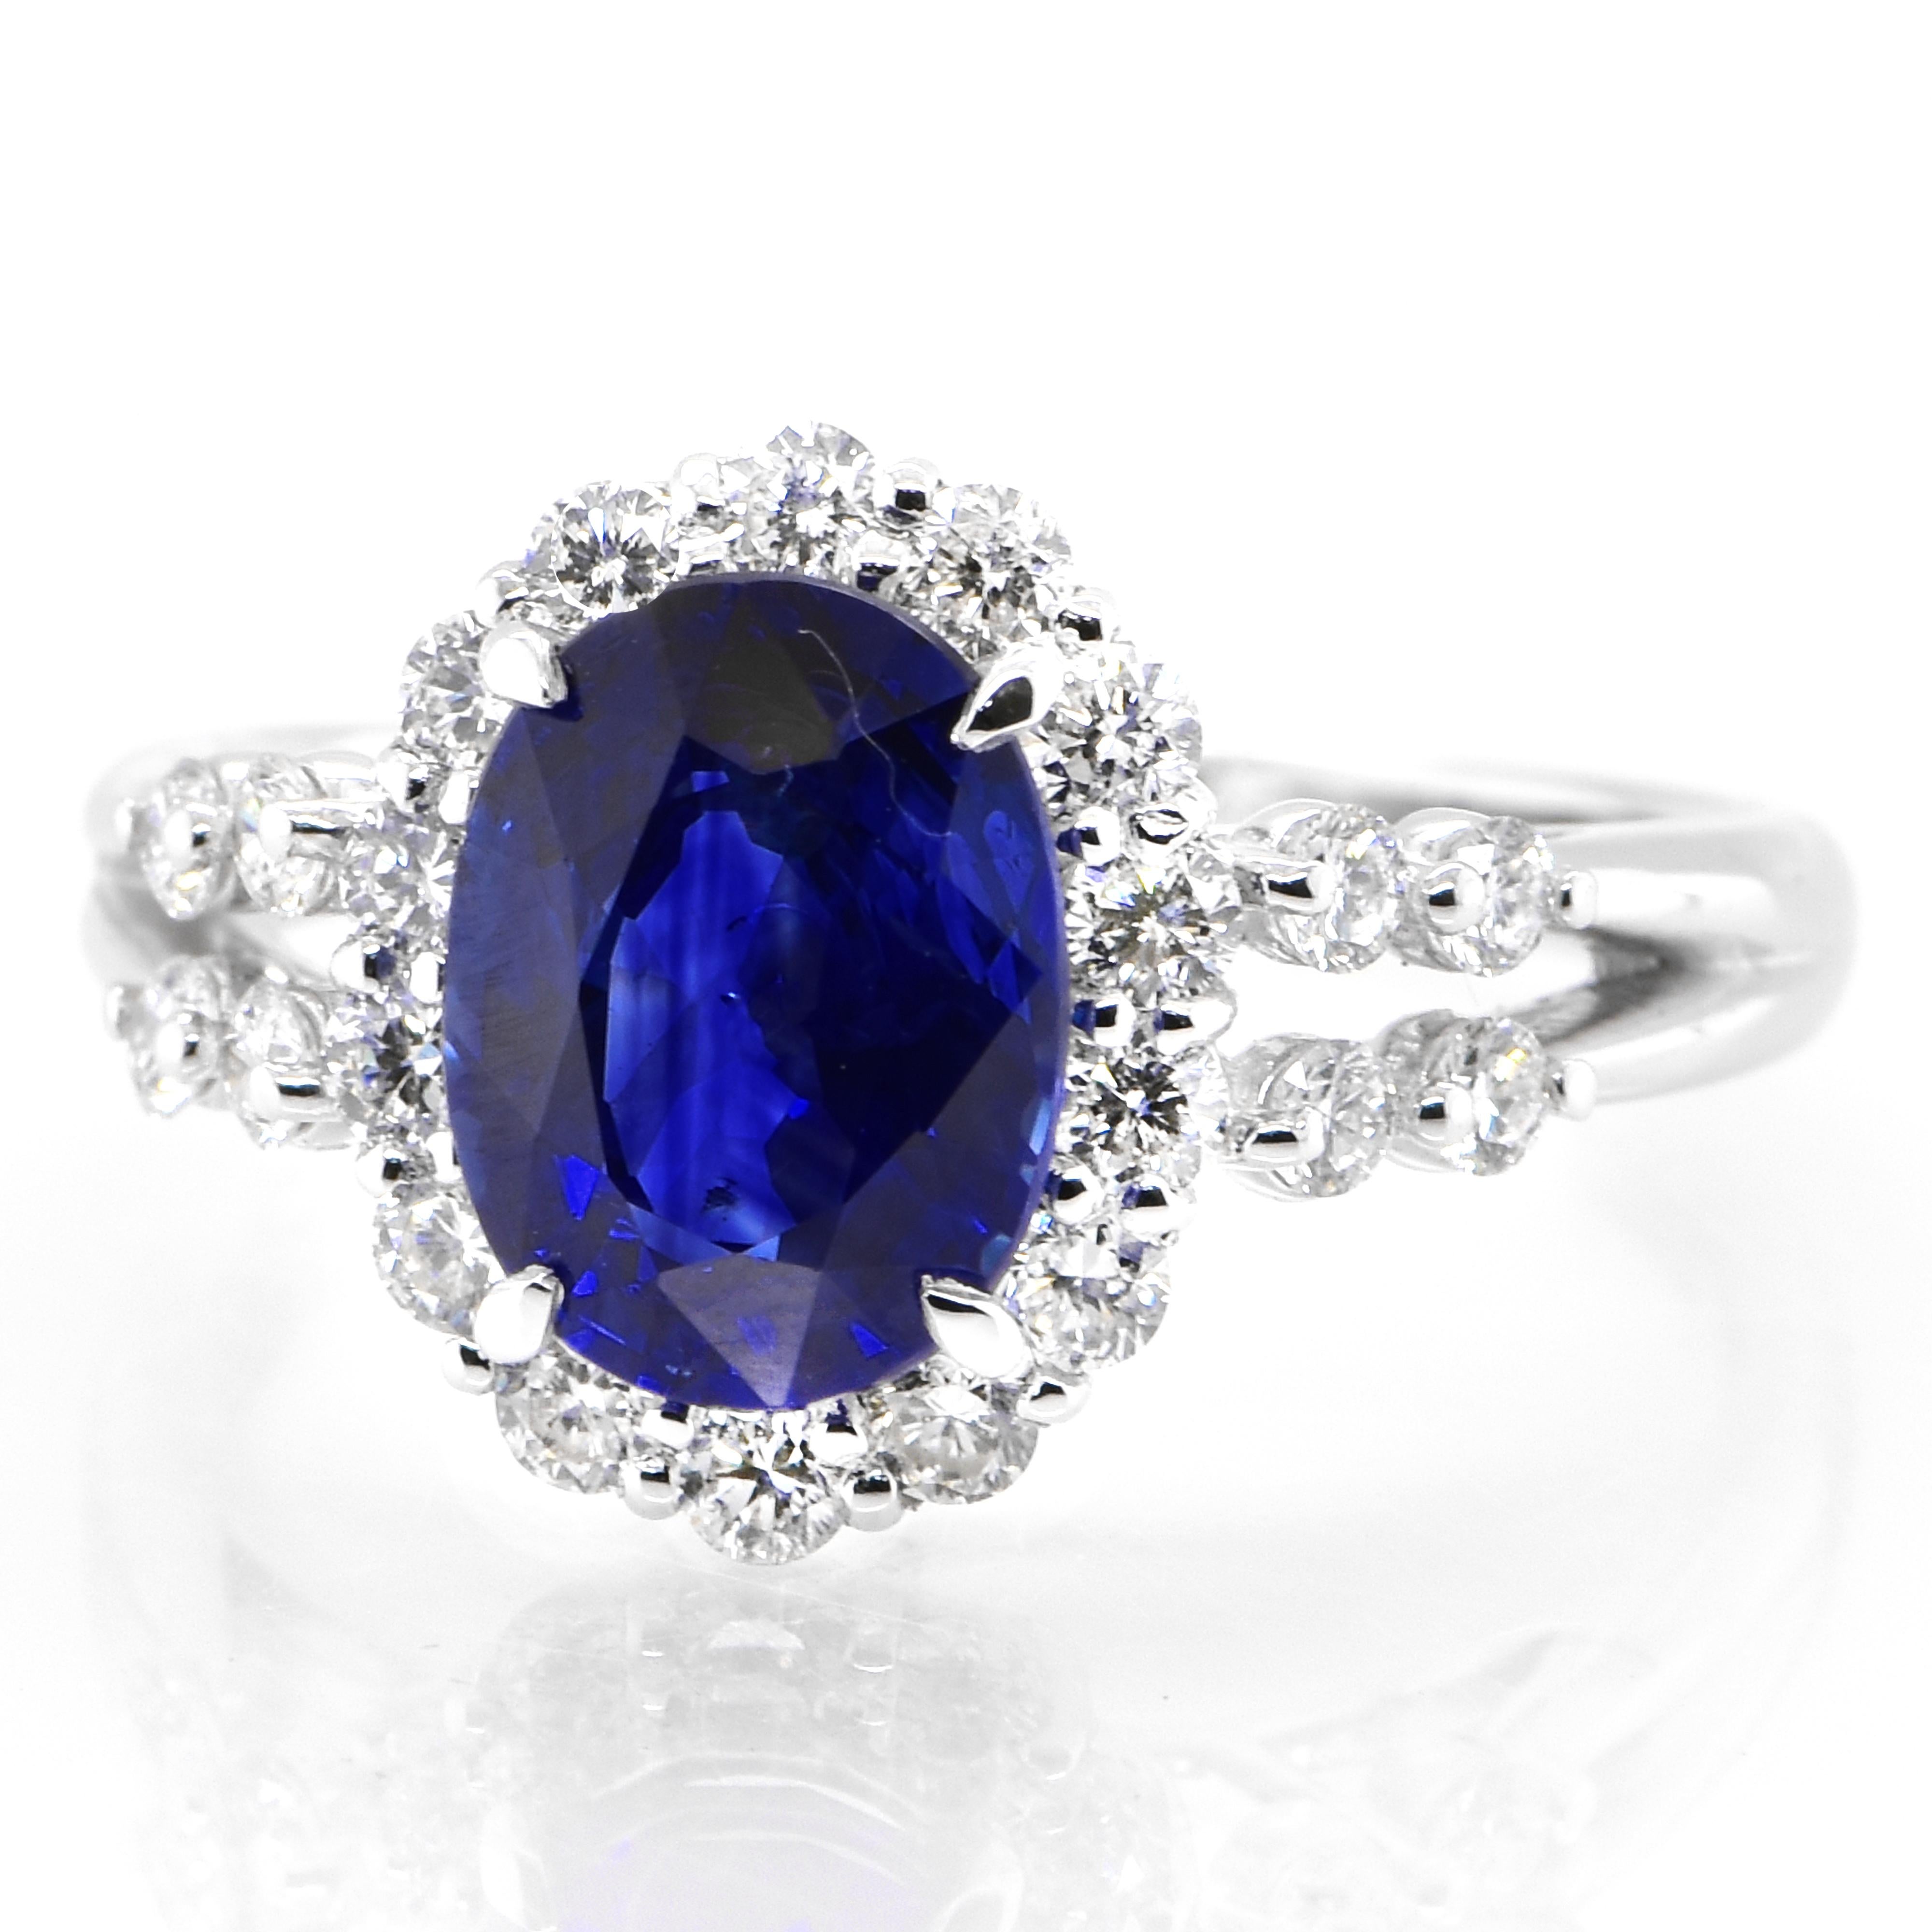 A beautiful ring featuring a AIGS Certified 2.33 Carat Royal Blue Blue Sapphire and 0.61 Carats Diamond Accents set in Platinum. Sapphires have extraordinary durability - they excel in hardness as well as toughness and durability making them very